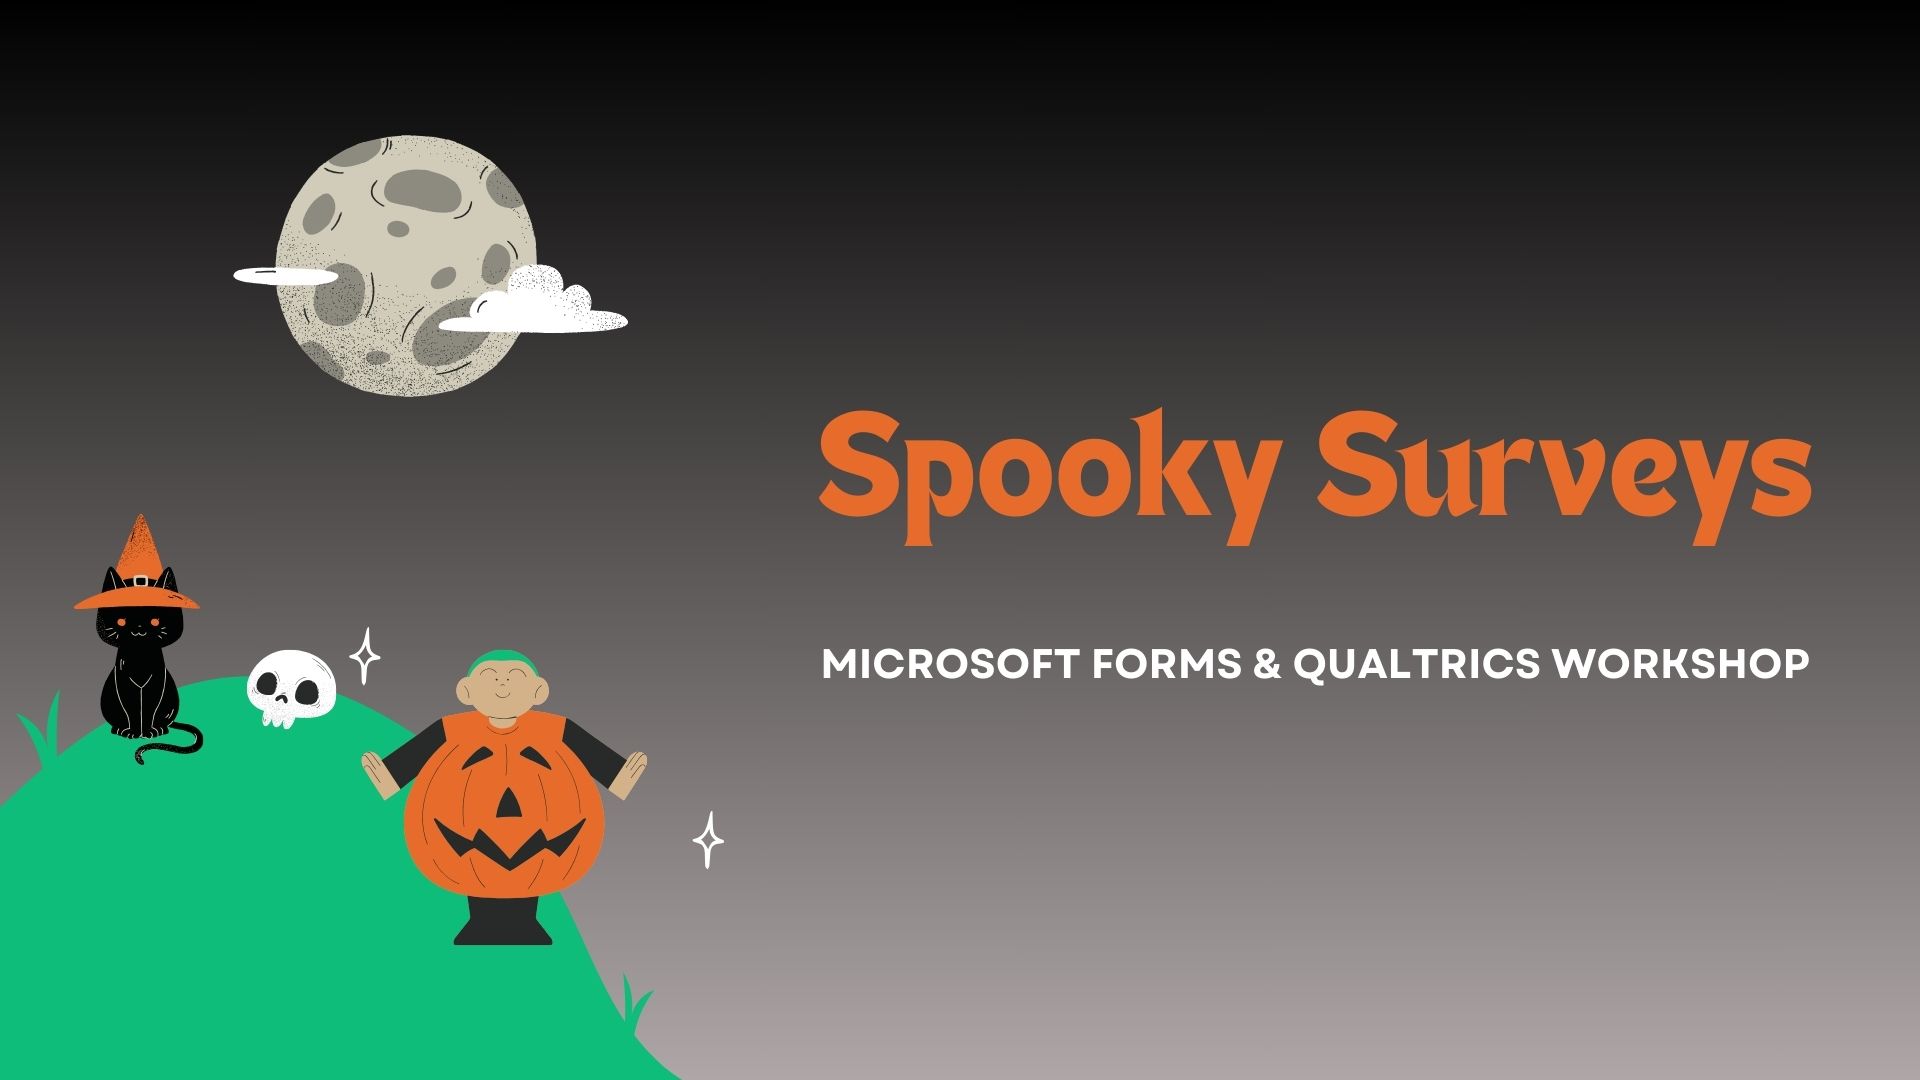 Cartoon of a person wearing a pumpkin costume standing on a hill with a black cat and a skull.